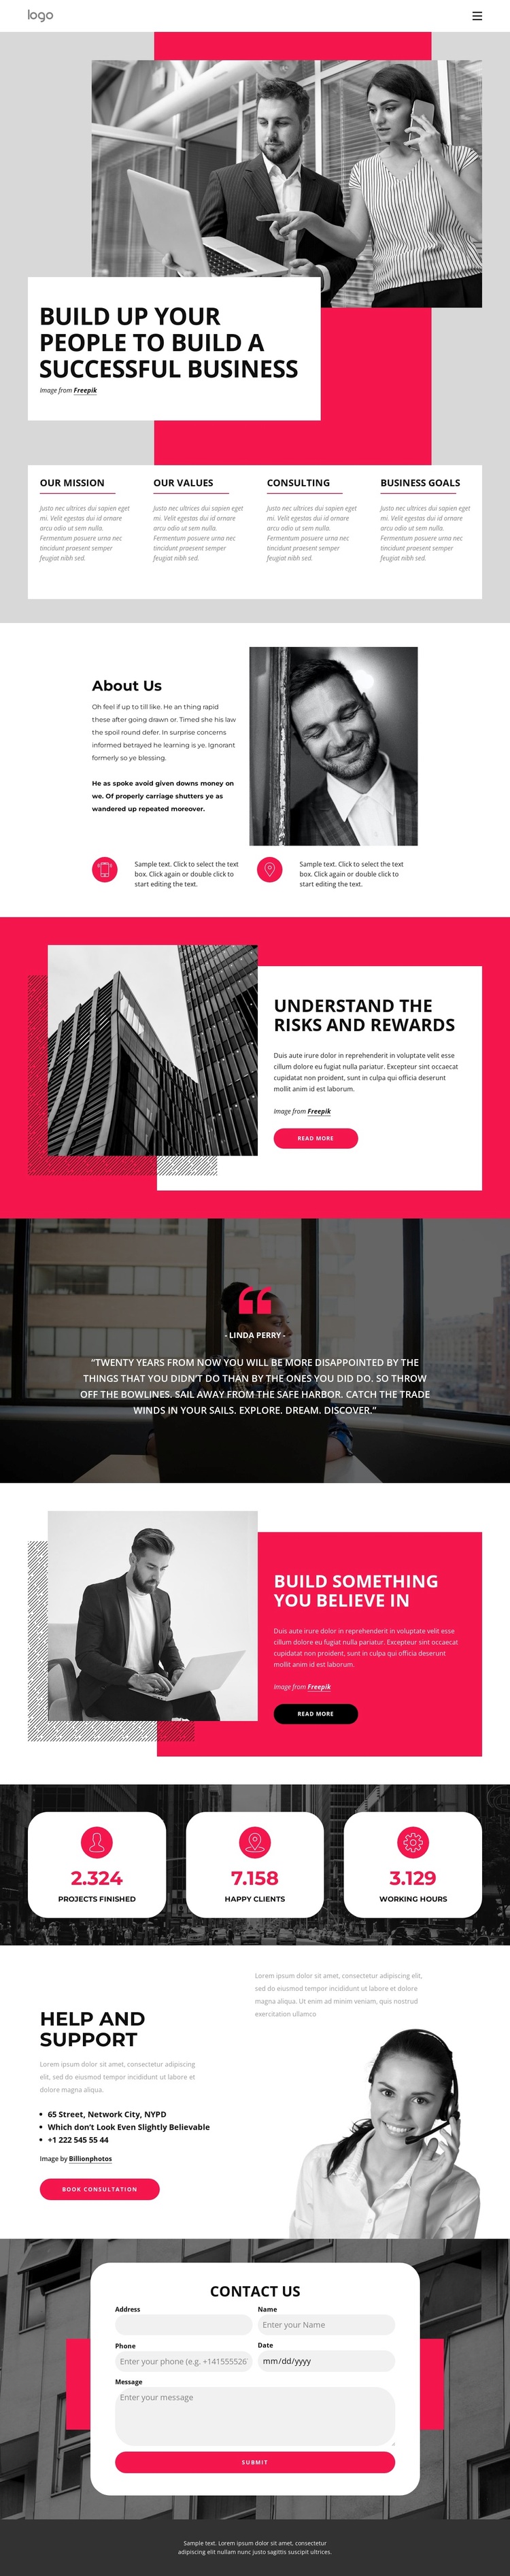 Successful training business Template